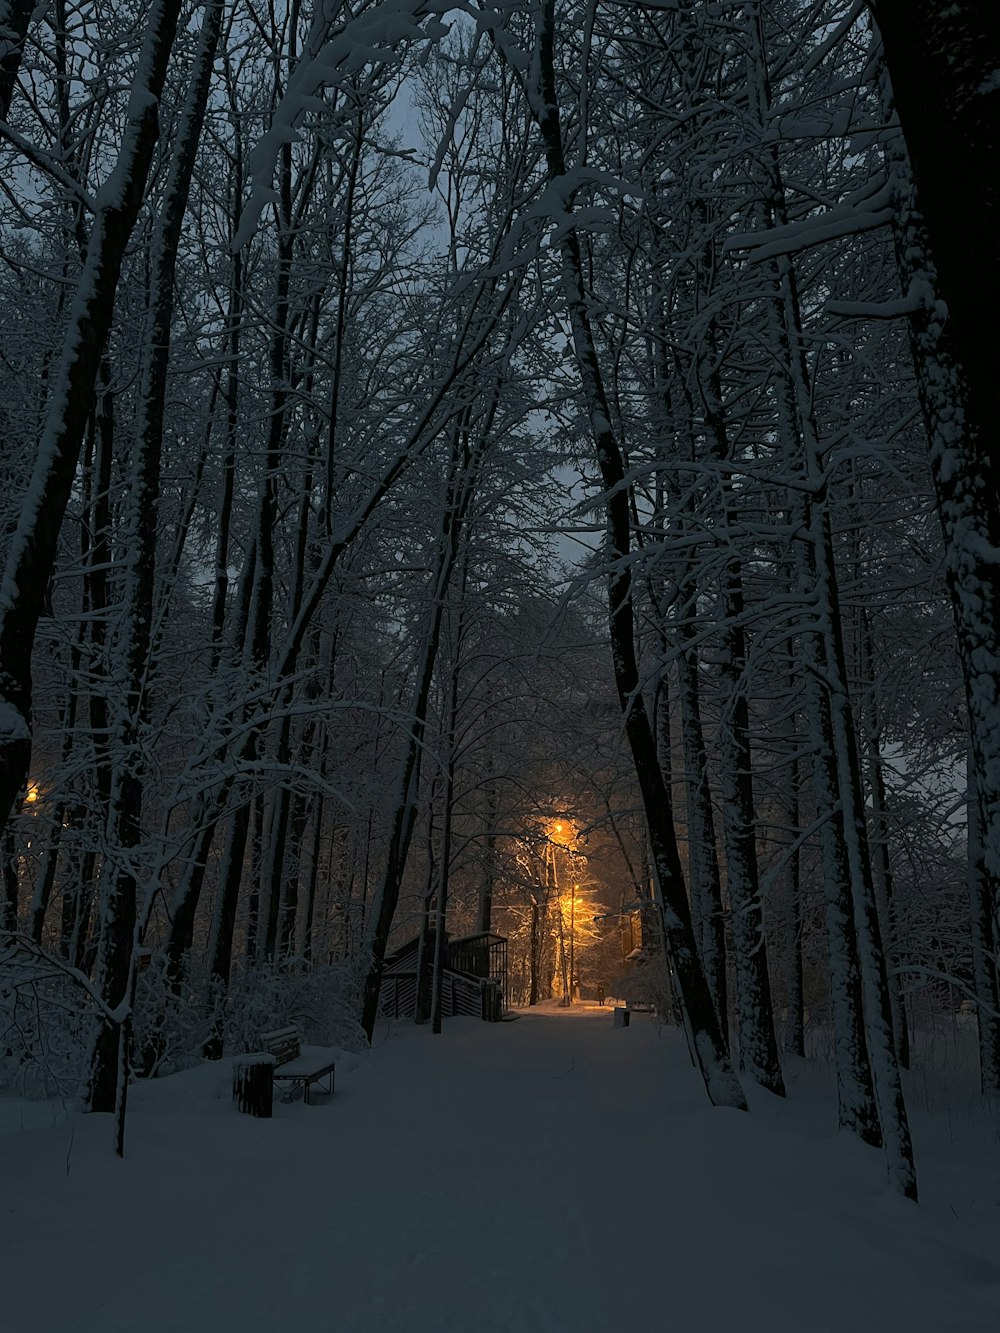 a snowy forest with a light in the middle